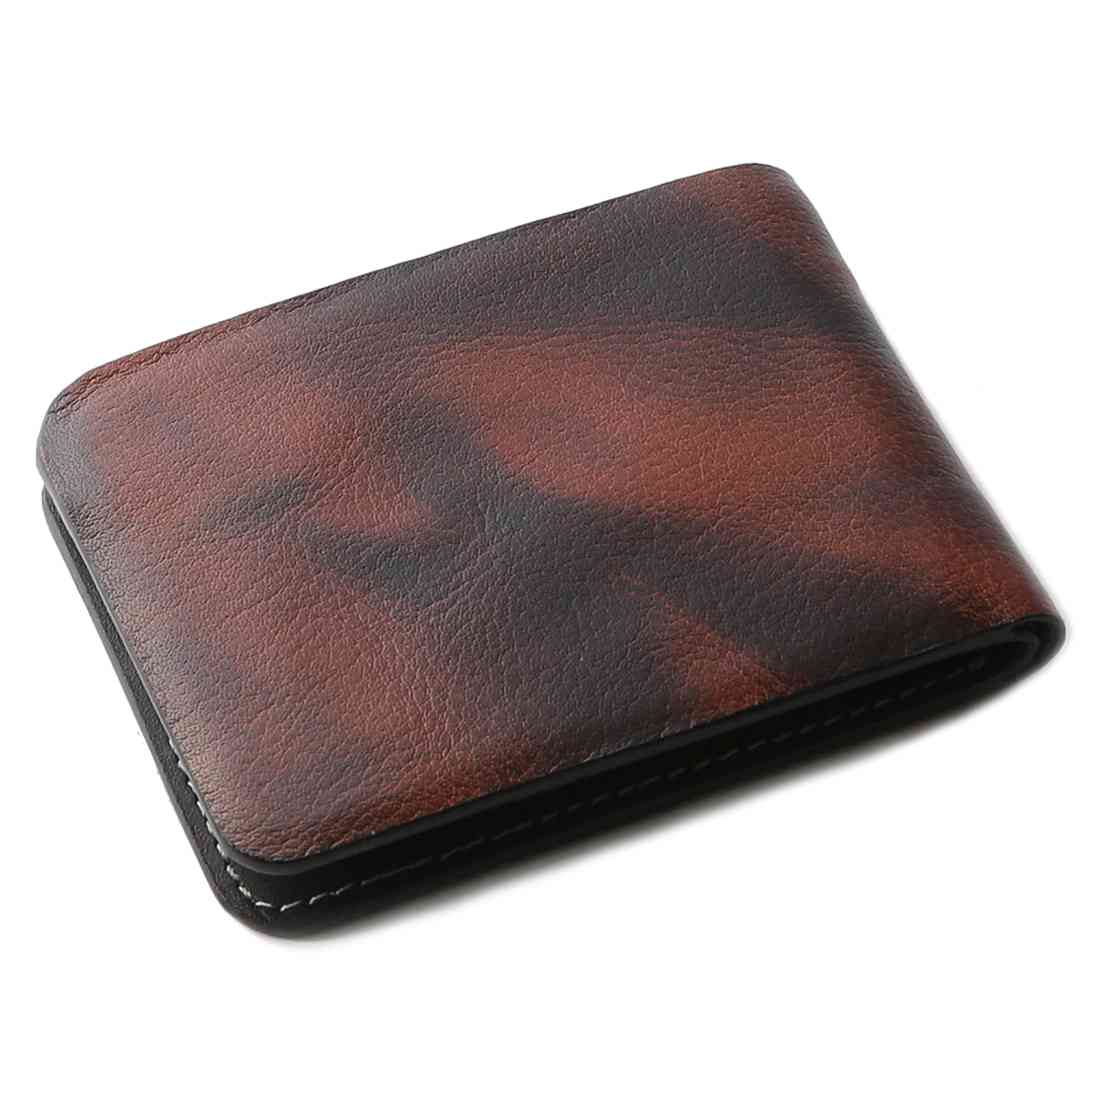 OHM New York Leather Wallet in Tiger Print